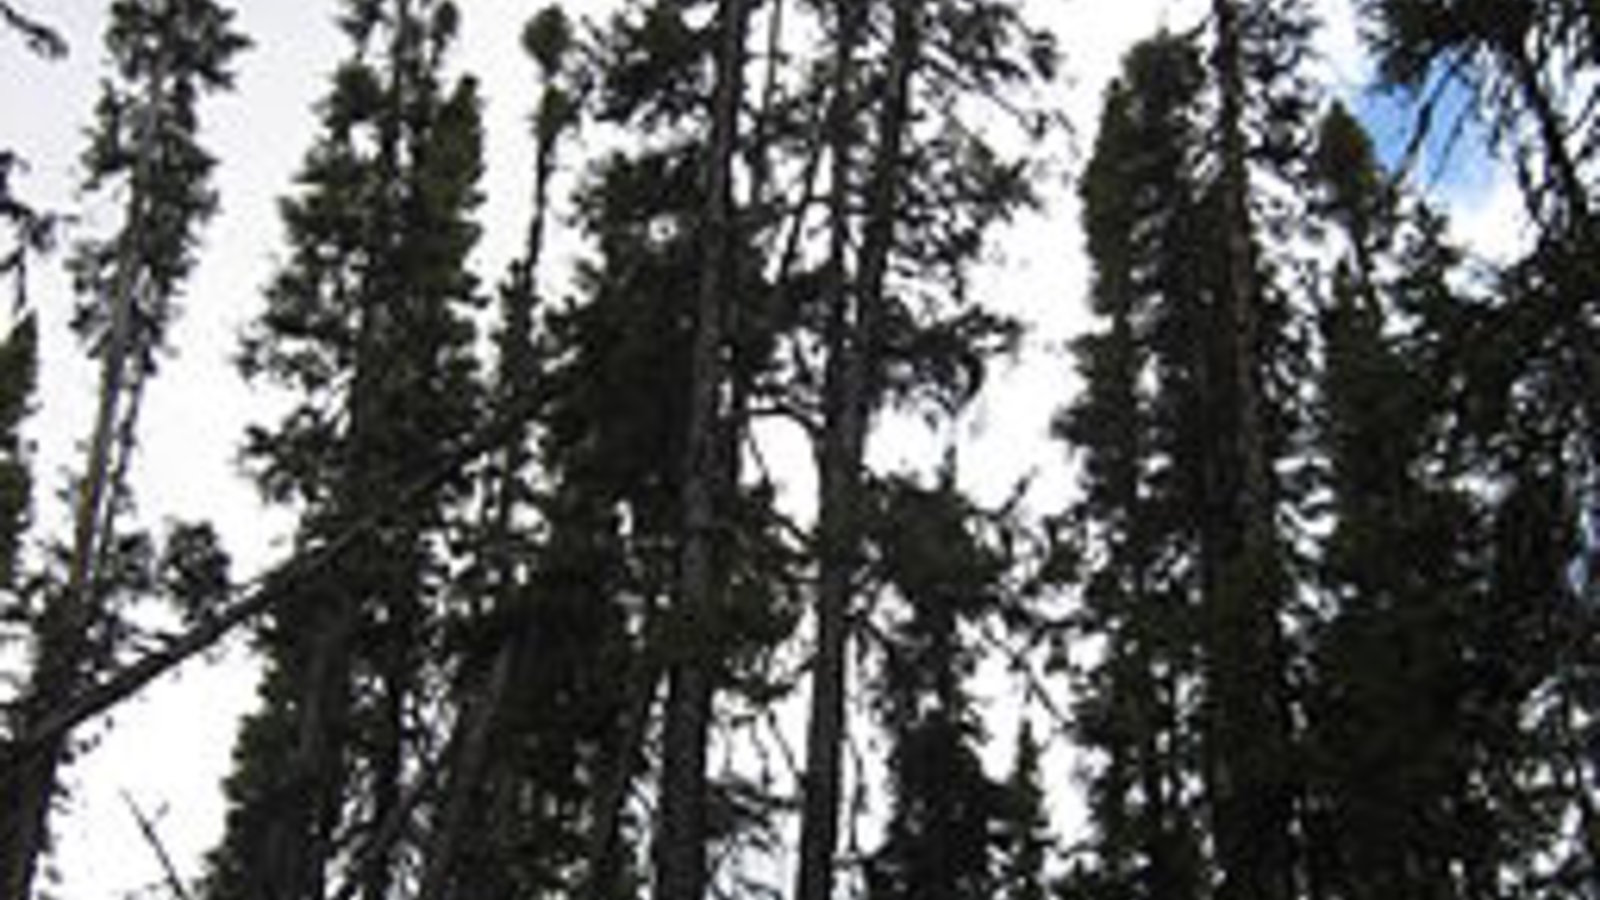 256px-boreal_forest-colocho-wikimedia-commons.jpg